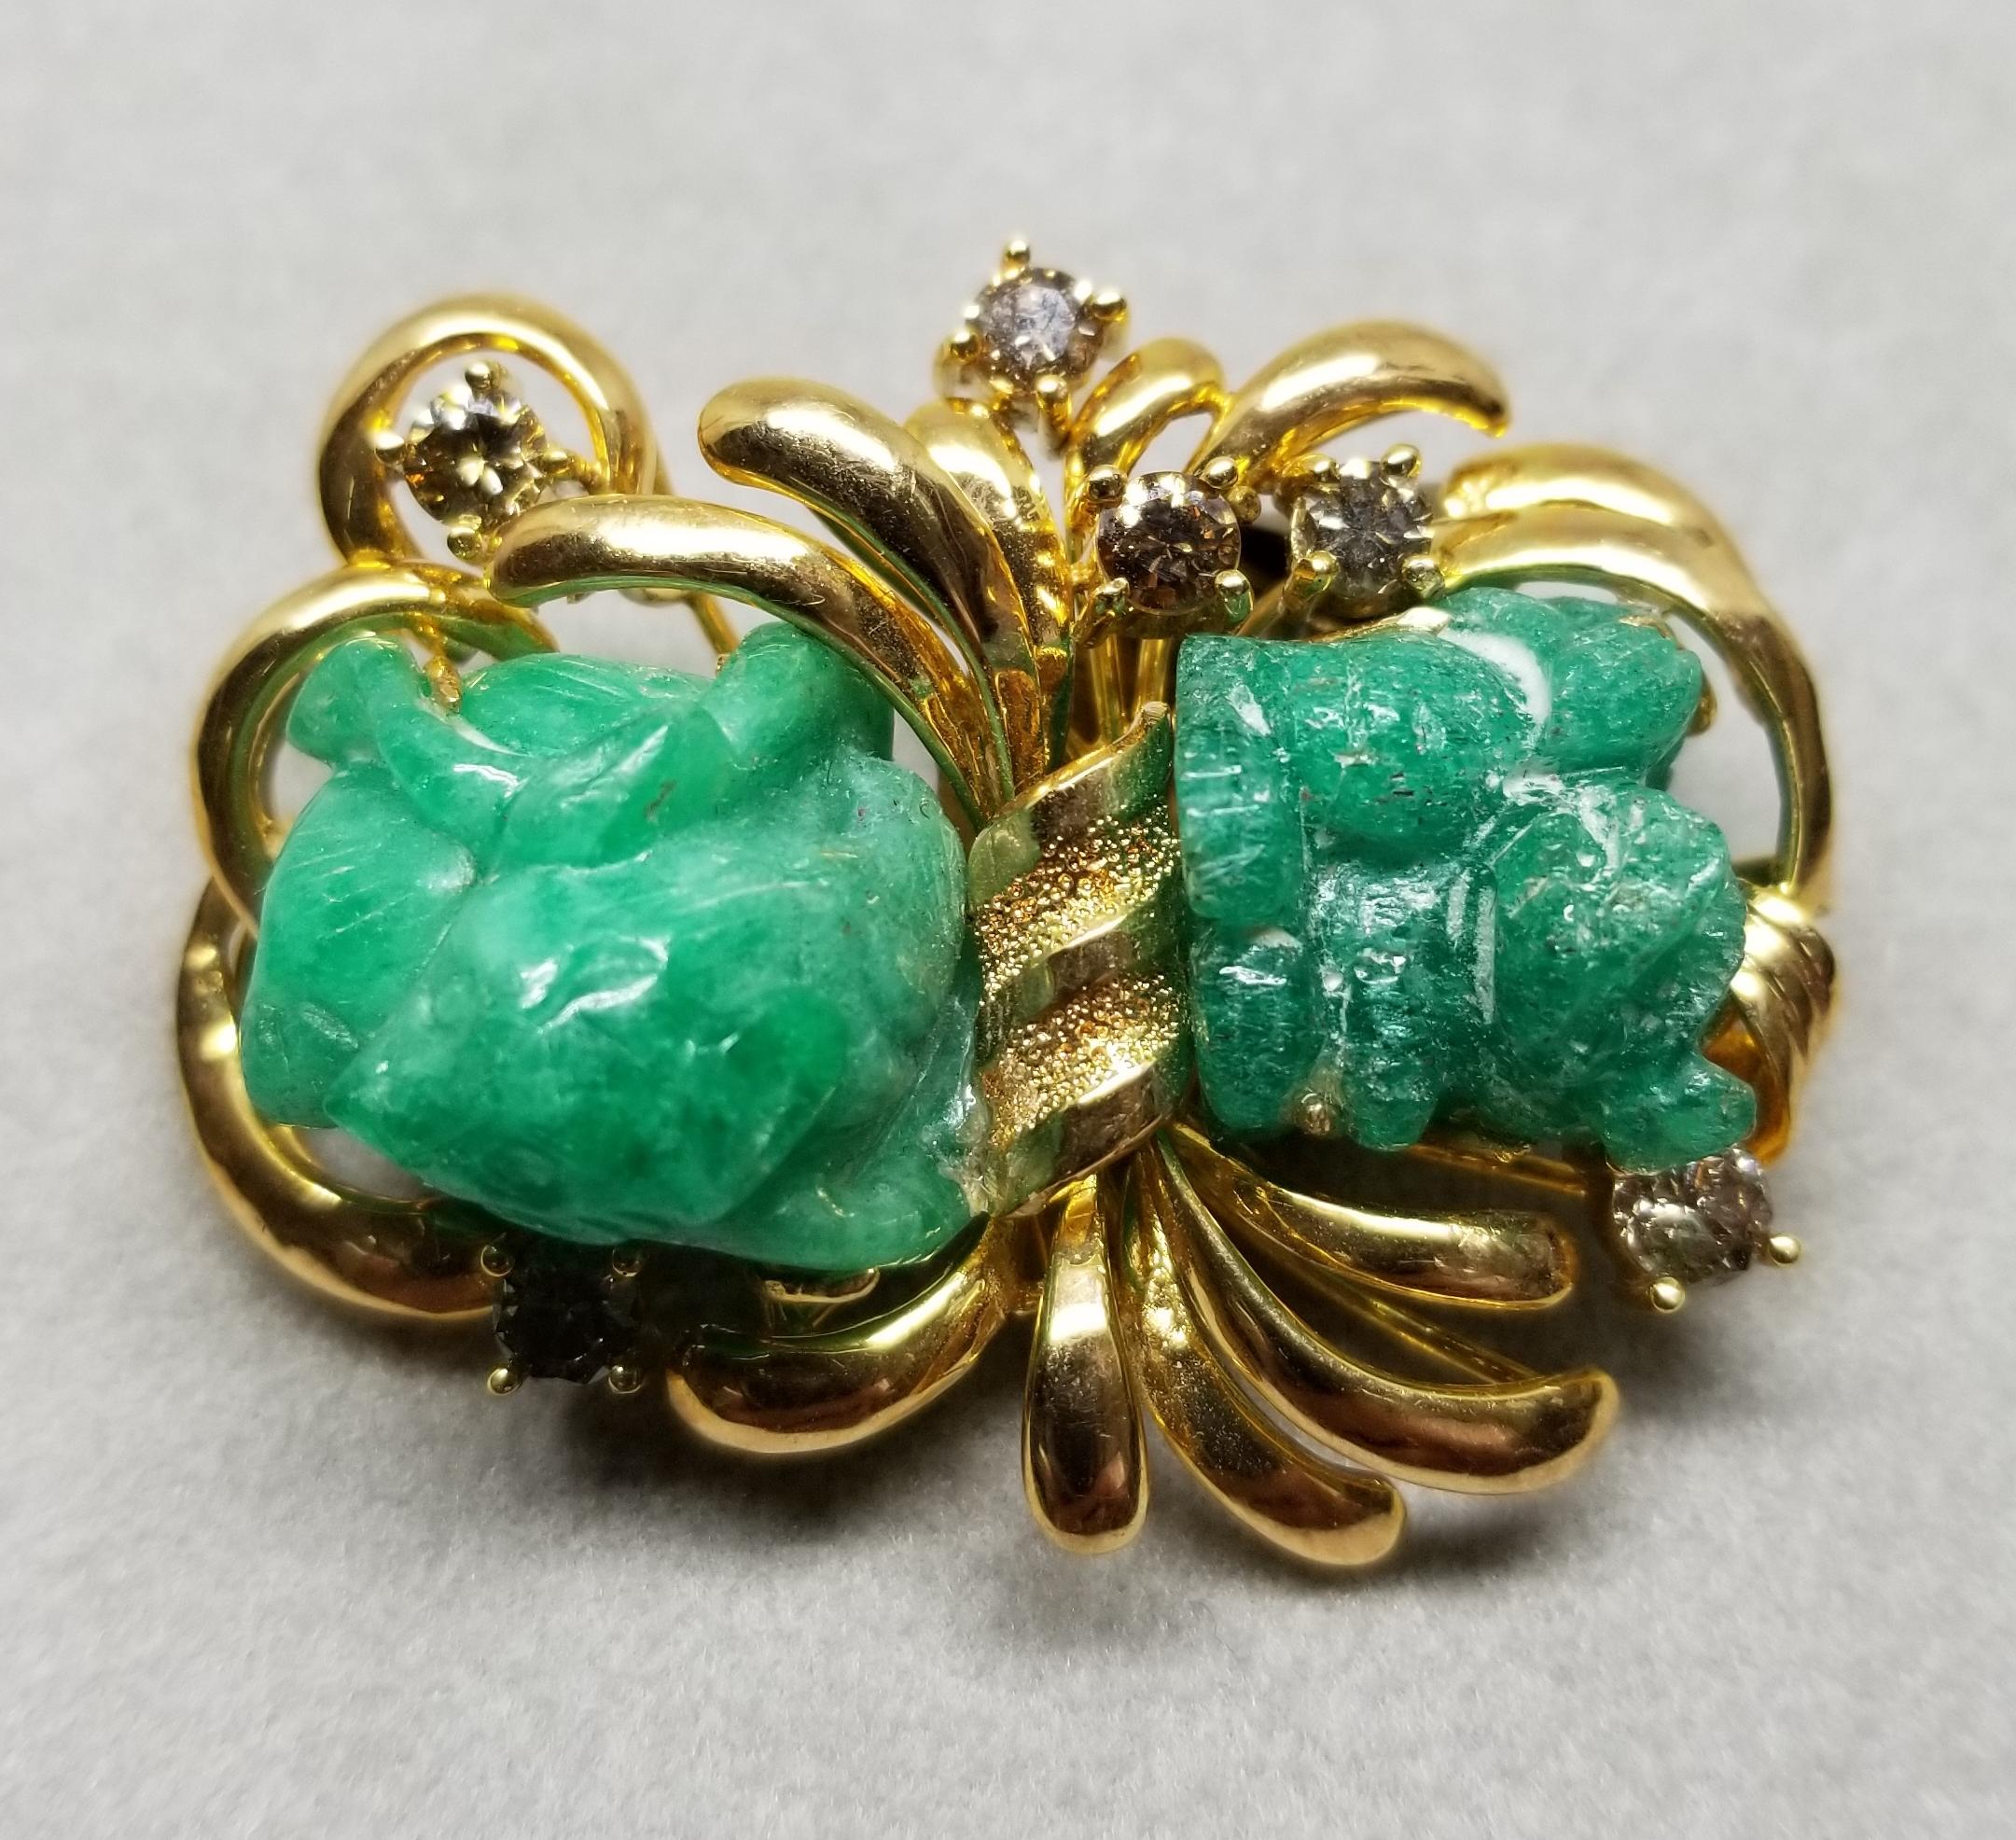 This piece of fine jewelry was designed and hand crafted by “Moshi” of New York, it was found in a vault from an estate sale and was never used.  14k yellow gold carved emerald and diamond pin, containing 2 hand carved emeralds weighing 30.82cts.